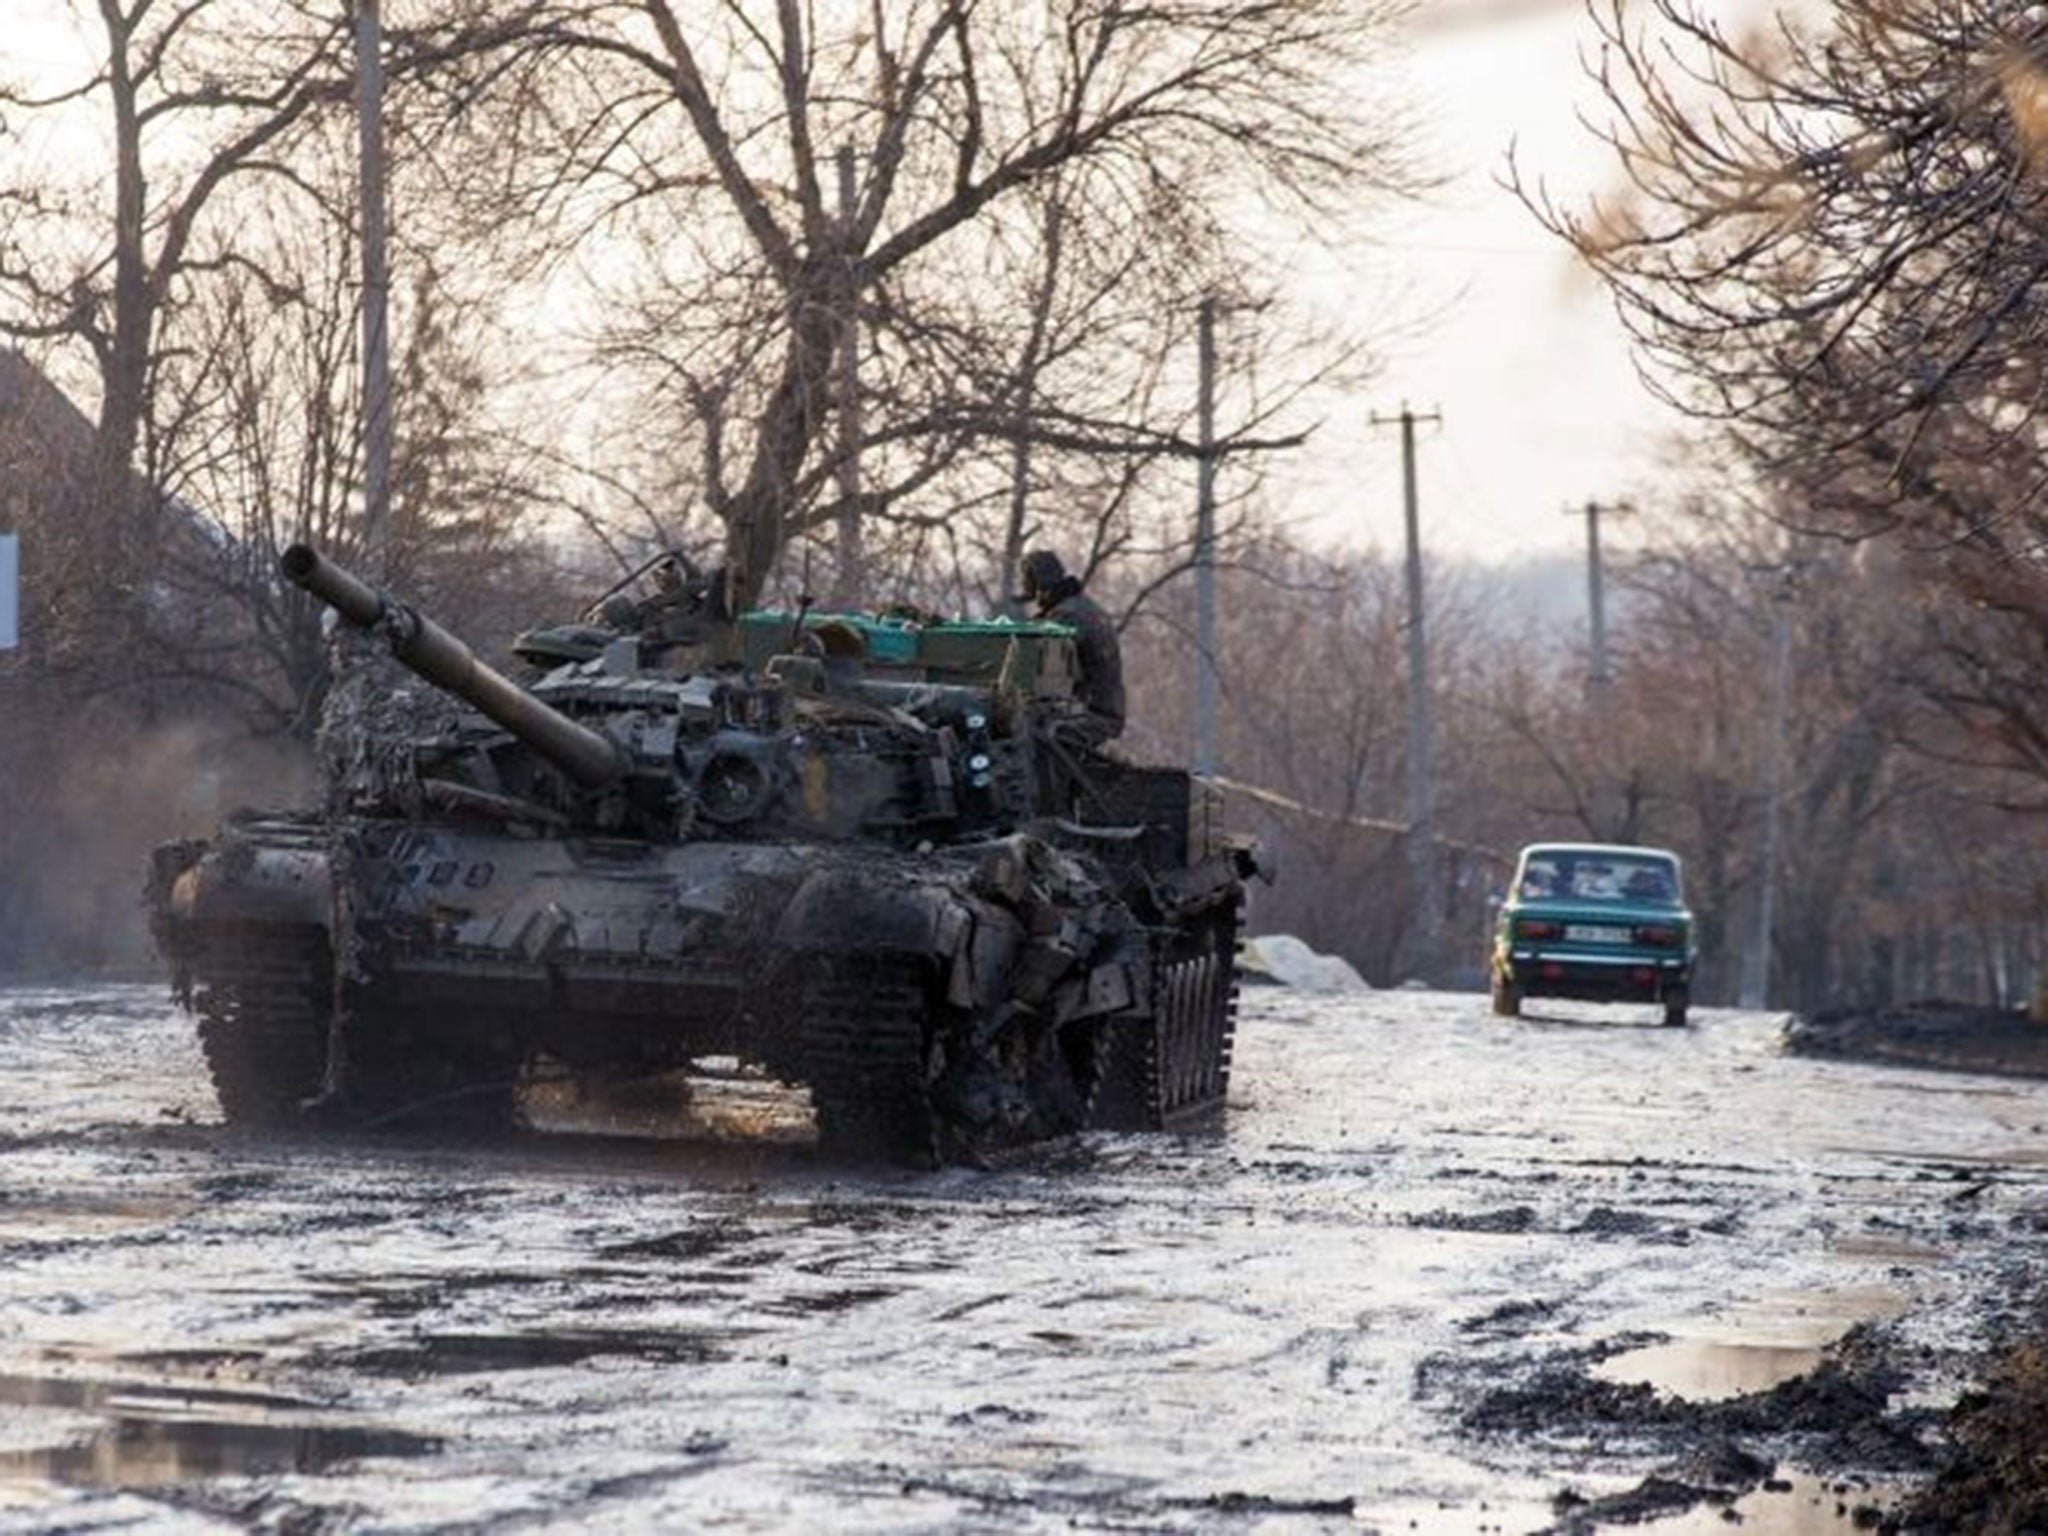 An armoured vehicle pulls a Ukrainian tank in the village of Horlivka, Donetsk region, on February 4, 2015, after it was damaged during combat between the Ukrainian forces and pro-Russian separatists.